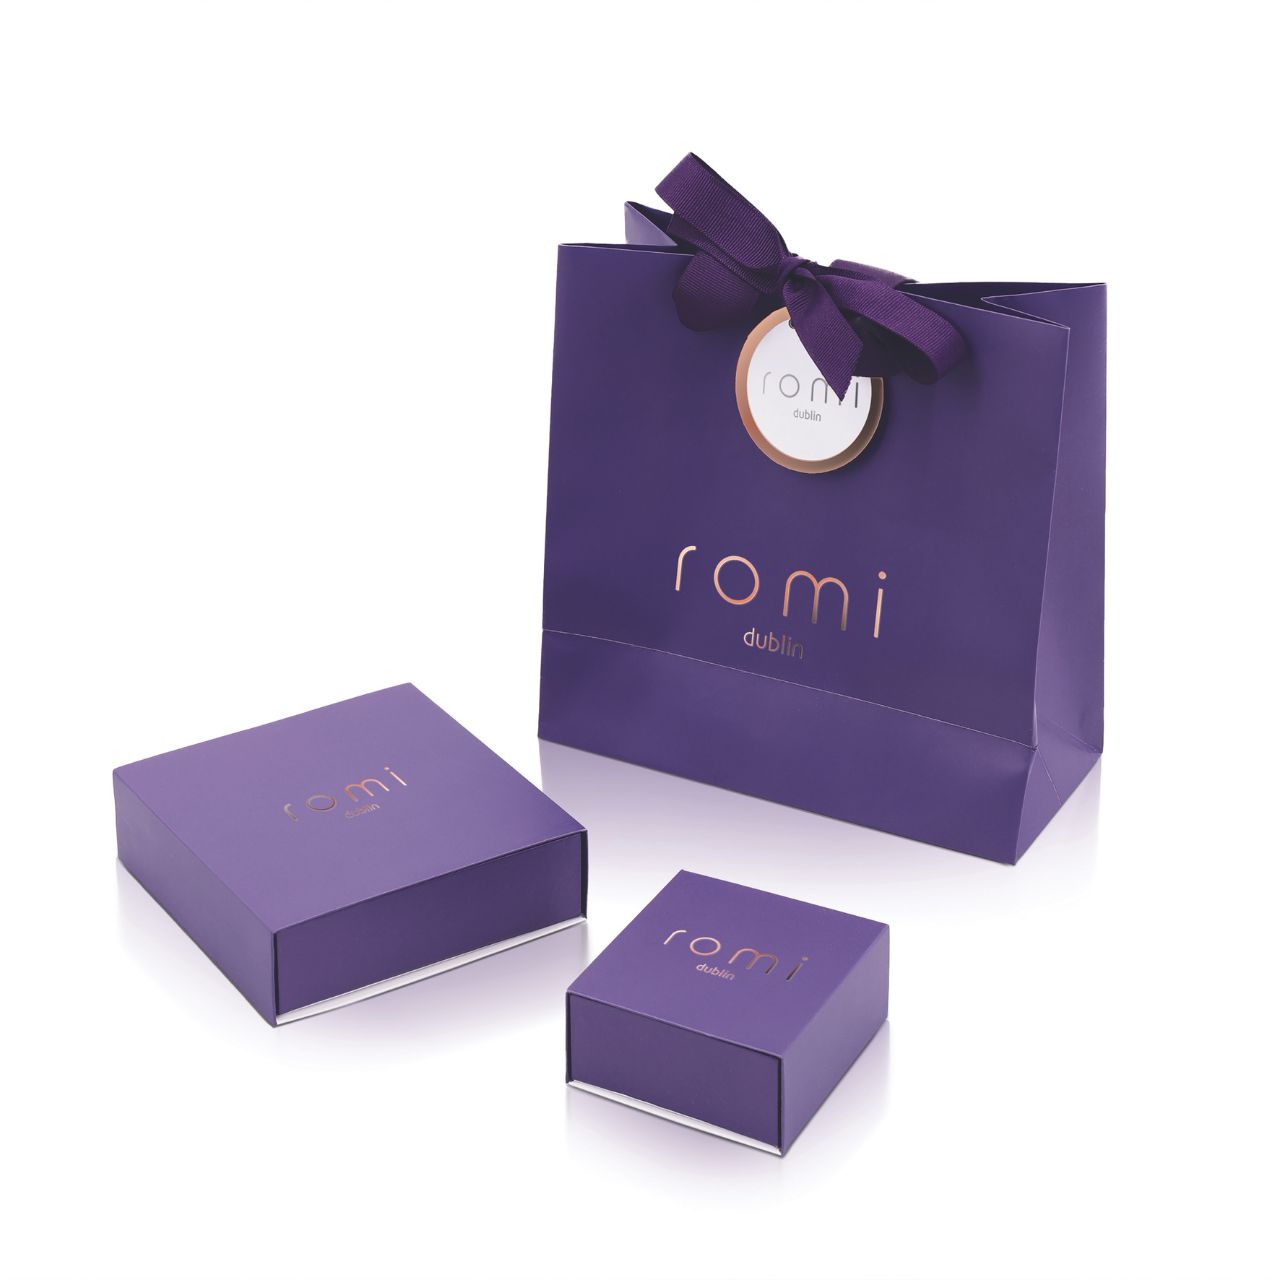 Romi Dublin Silver Popcorn Chain Bar Necklace  This easy-to-wear jewellery collection was inspired by daughter Romi who loves to style and accessorise. An outfit isn’t complete until the perfect pieces of jewellery and accessories have been selected to enhance it.